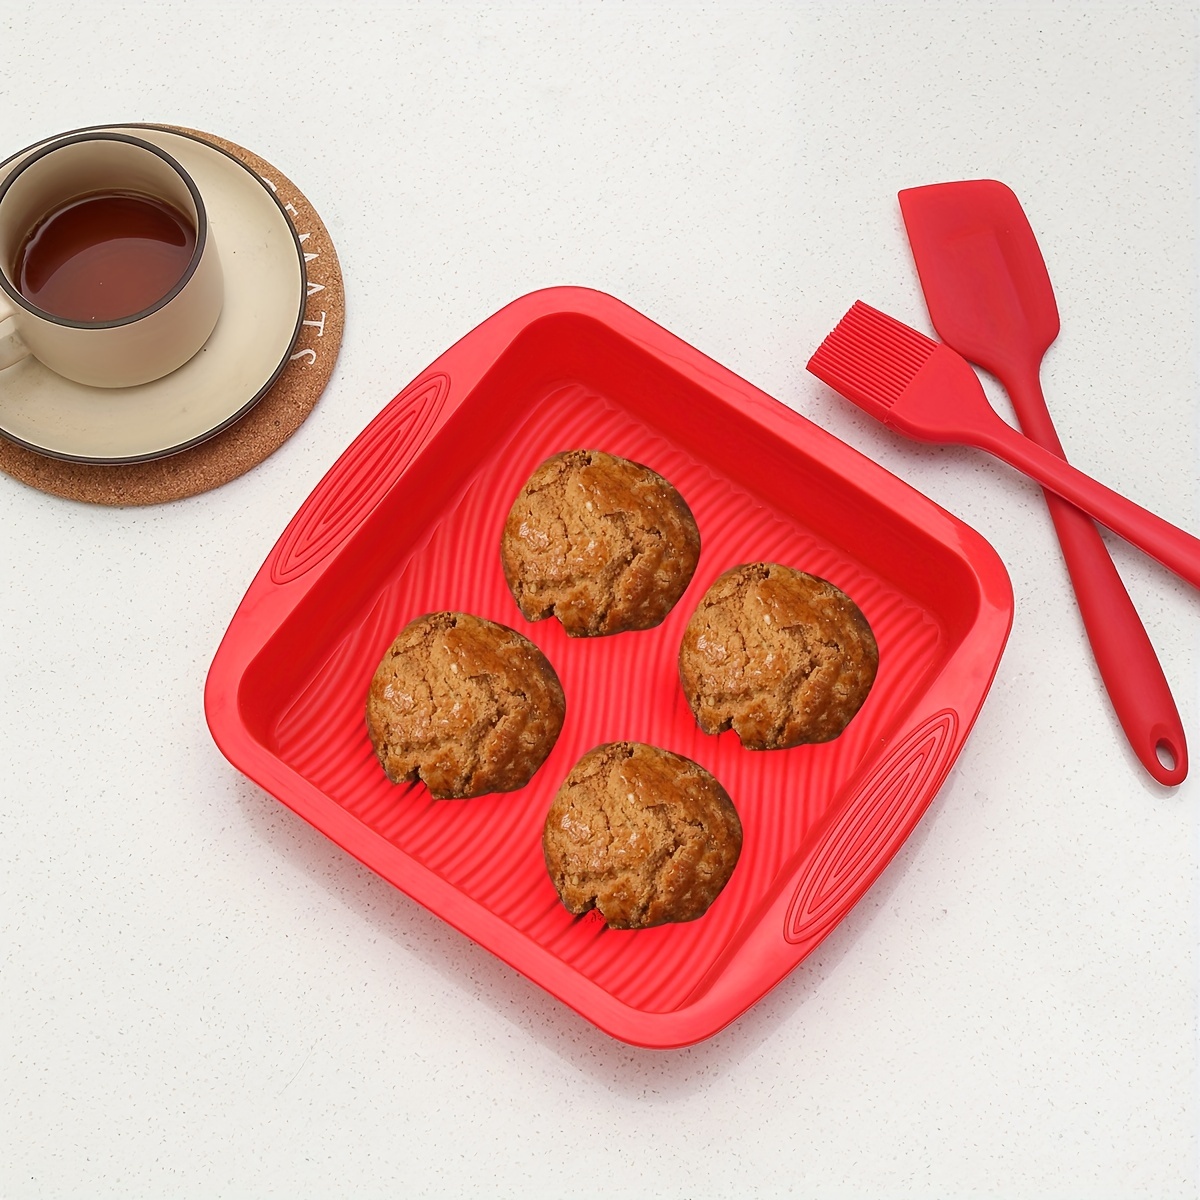 4 Piece Red Silicone Bakeware Set with Square Brownie Pan, Bread Loaf,  Round Cake and Pie Pans (Nonstick)